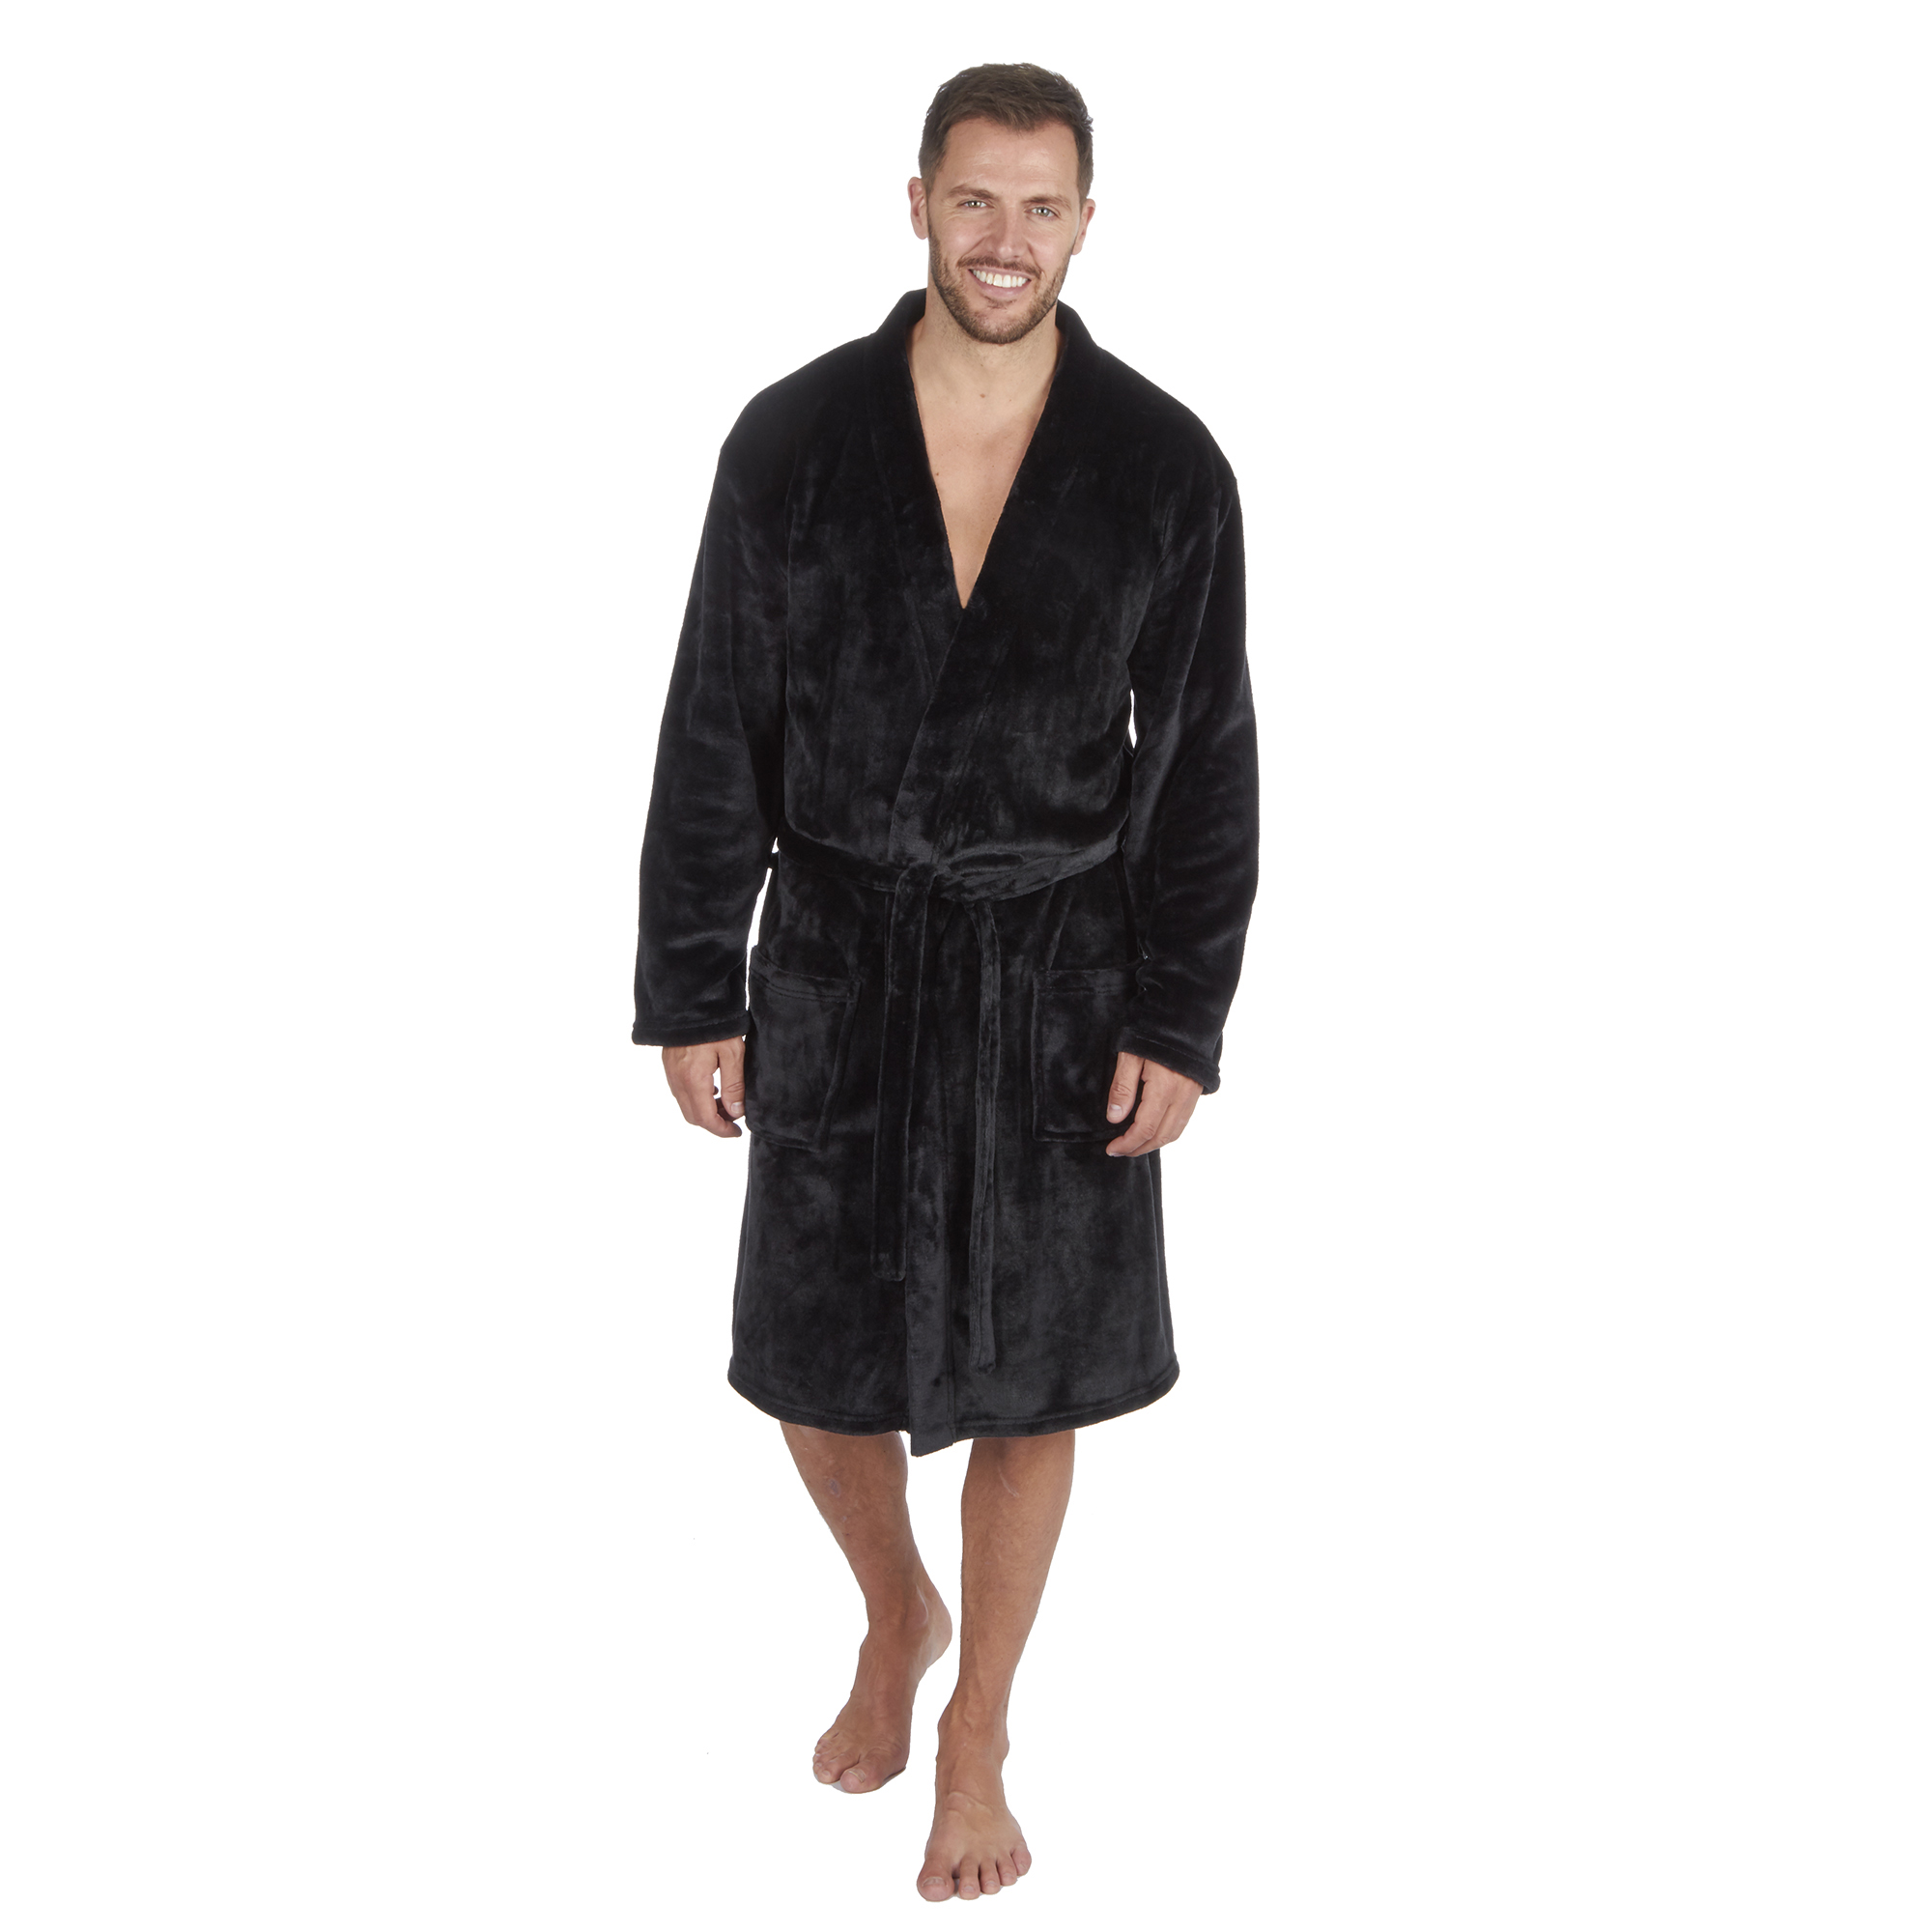 Metzuyan Mens Check Hooded Dressing Gown Soft Robe with Pockets Sizes M-XXL 